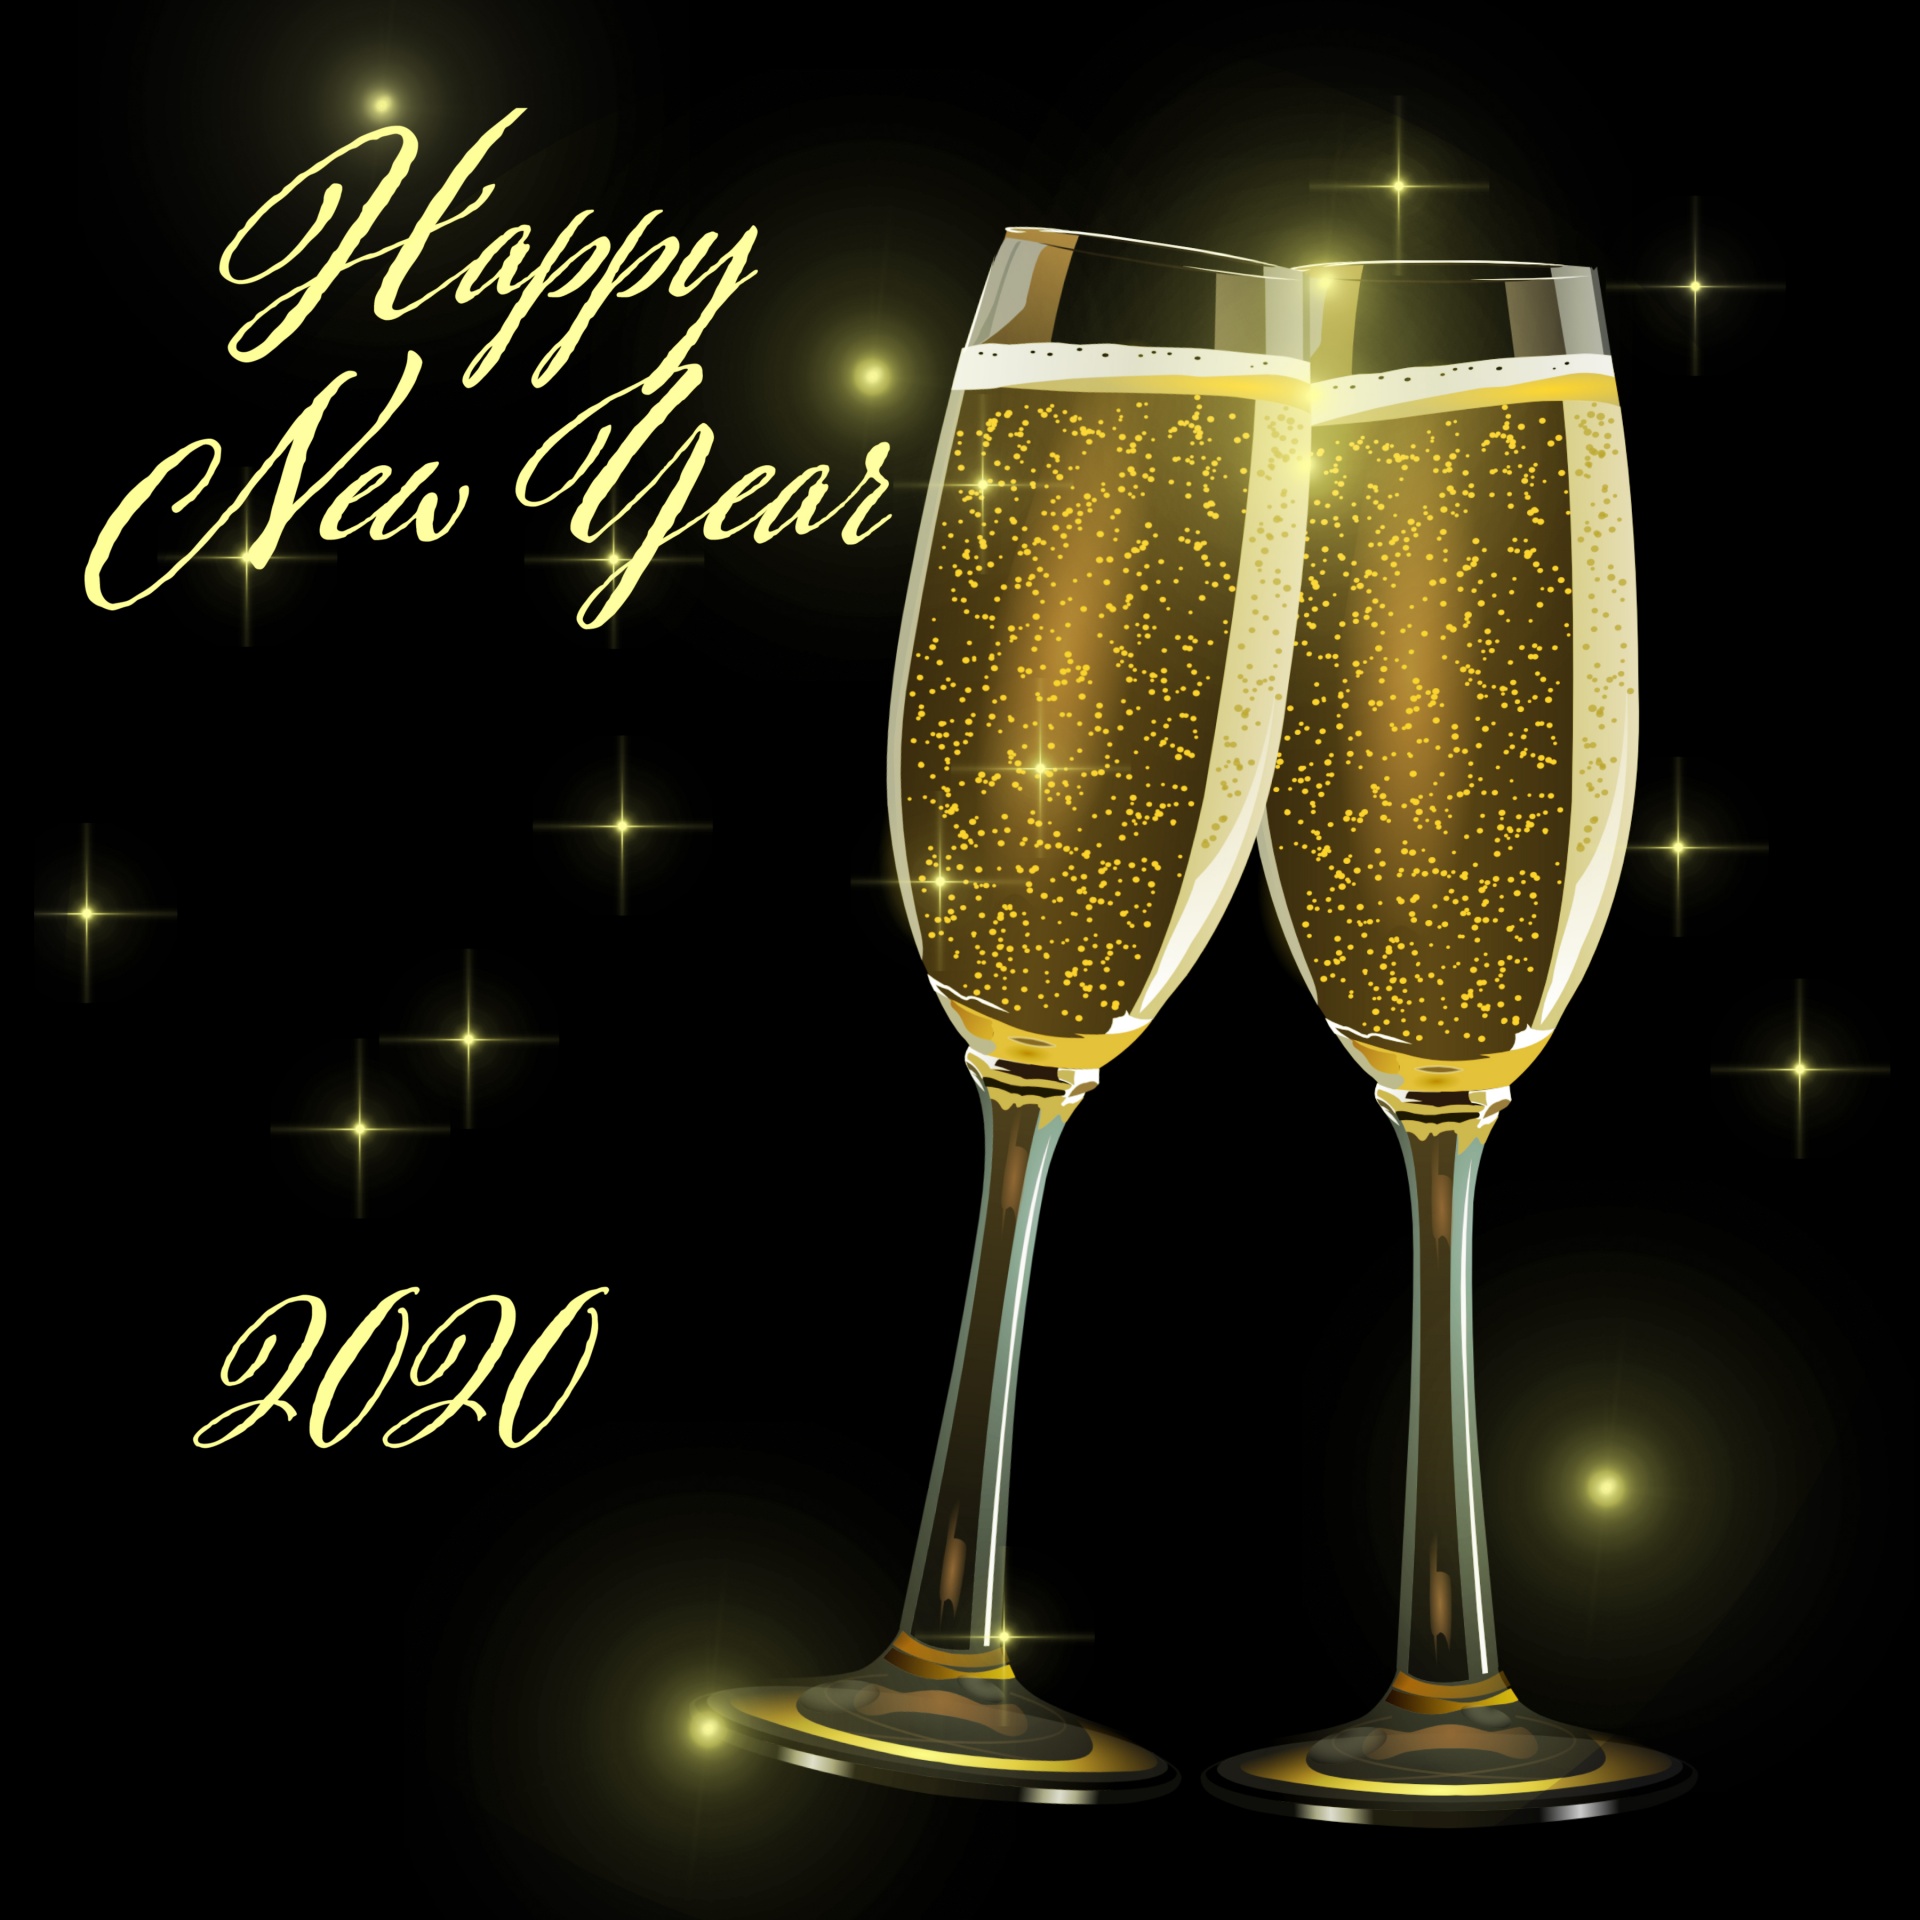 2020 New Year background card with champagne and stars